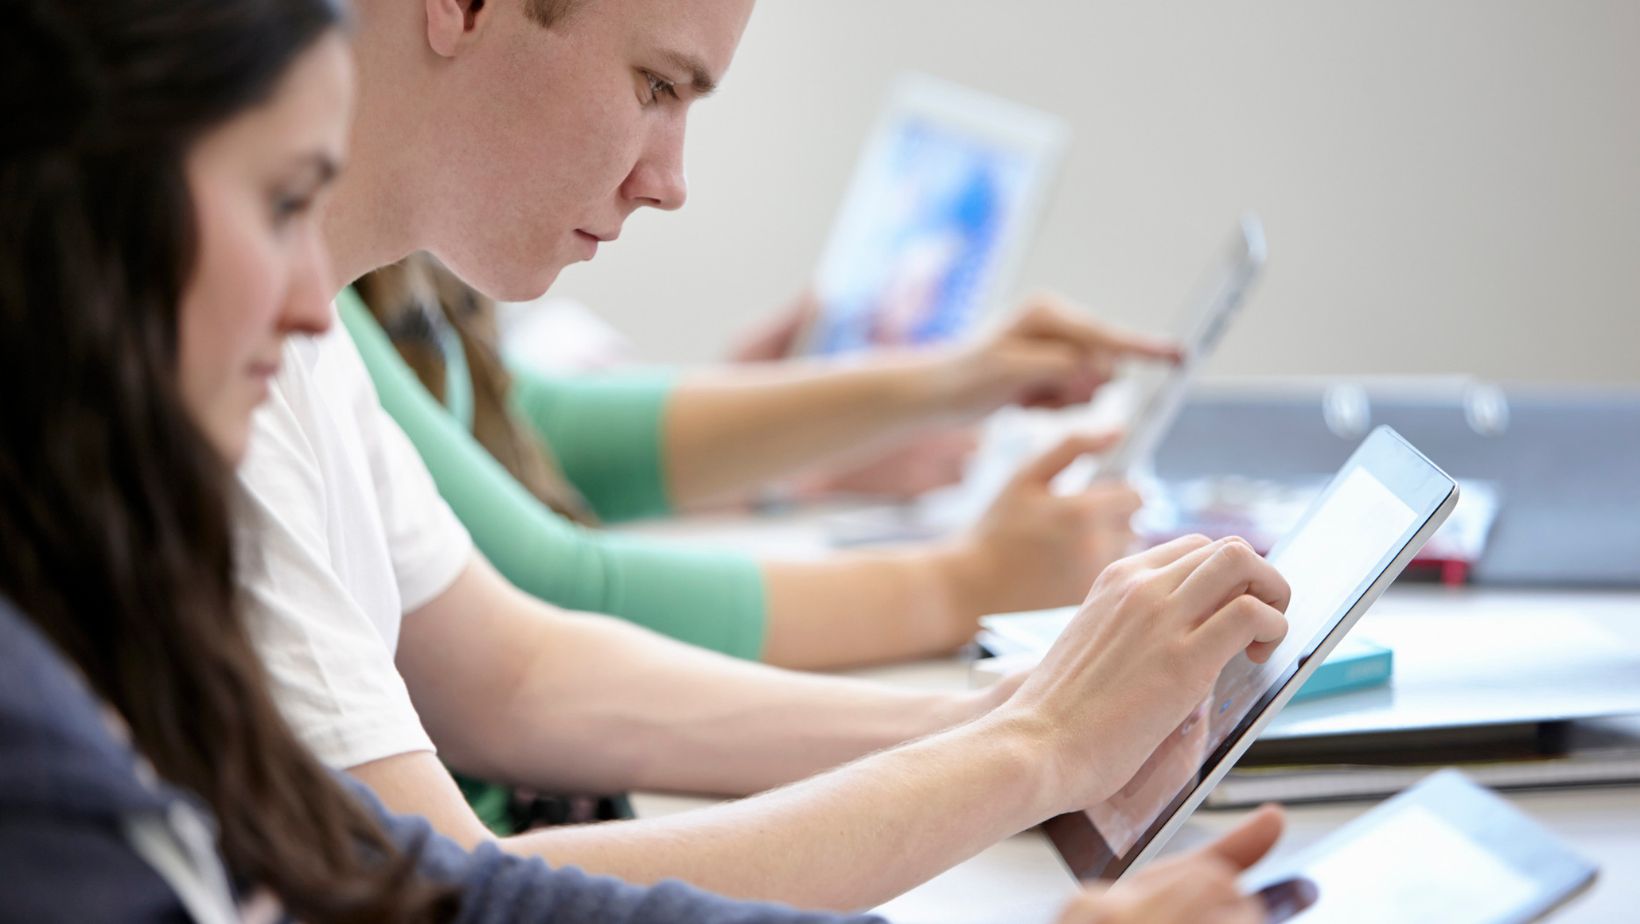 How to Optimize College Experience in a Digital Classroom?